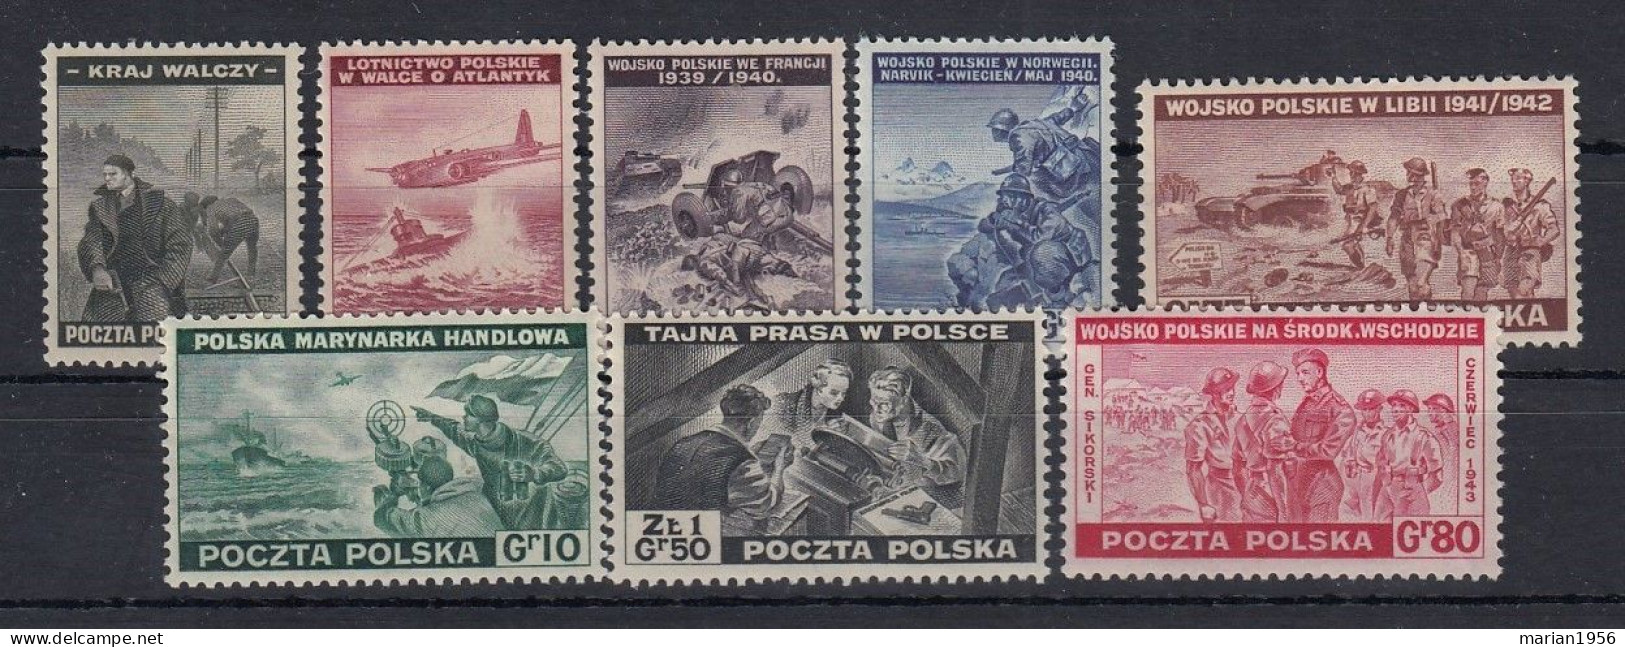 Pologne 1943 - Guerre - WWII - GOVERNMENT In EXILE (LONDON) - ARMEE POLONAISE -Mich. 368/75 - MNH - Gouvernement De Londres (exil)